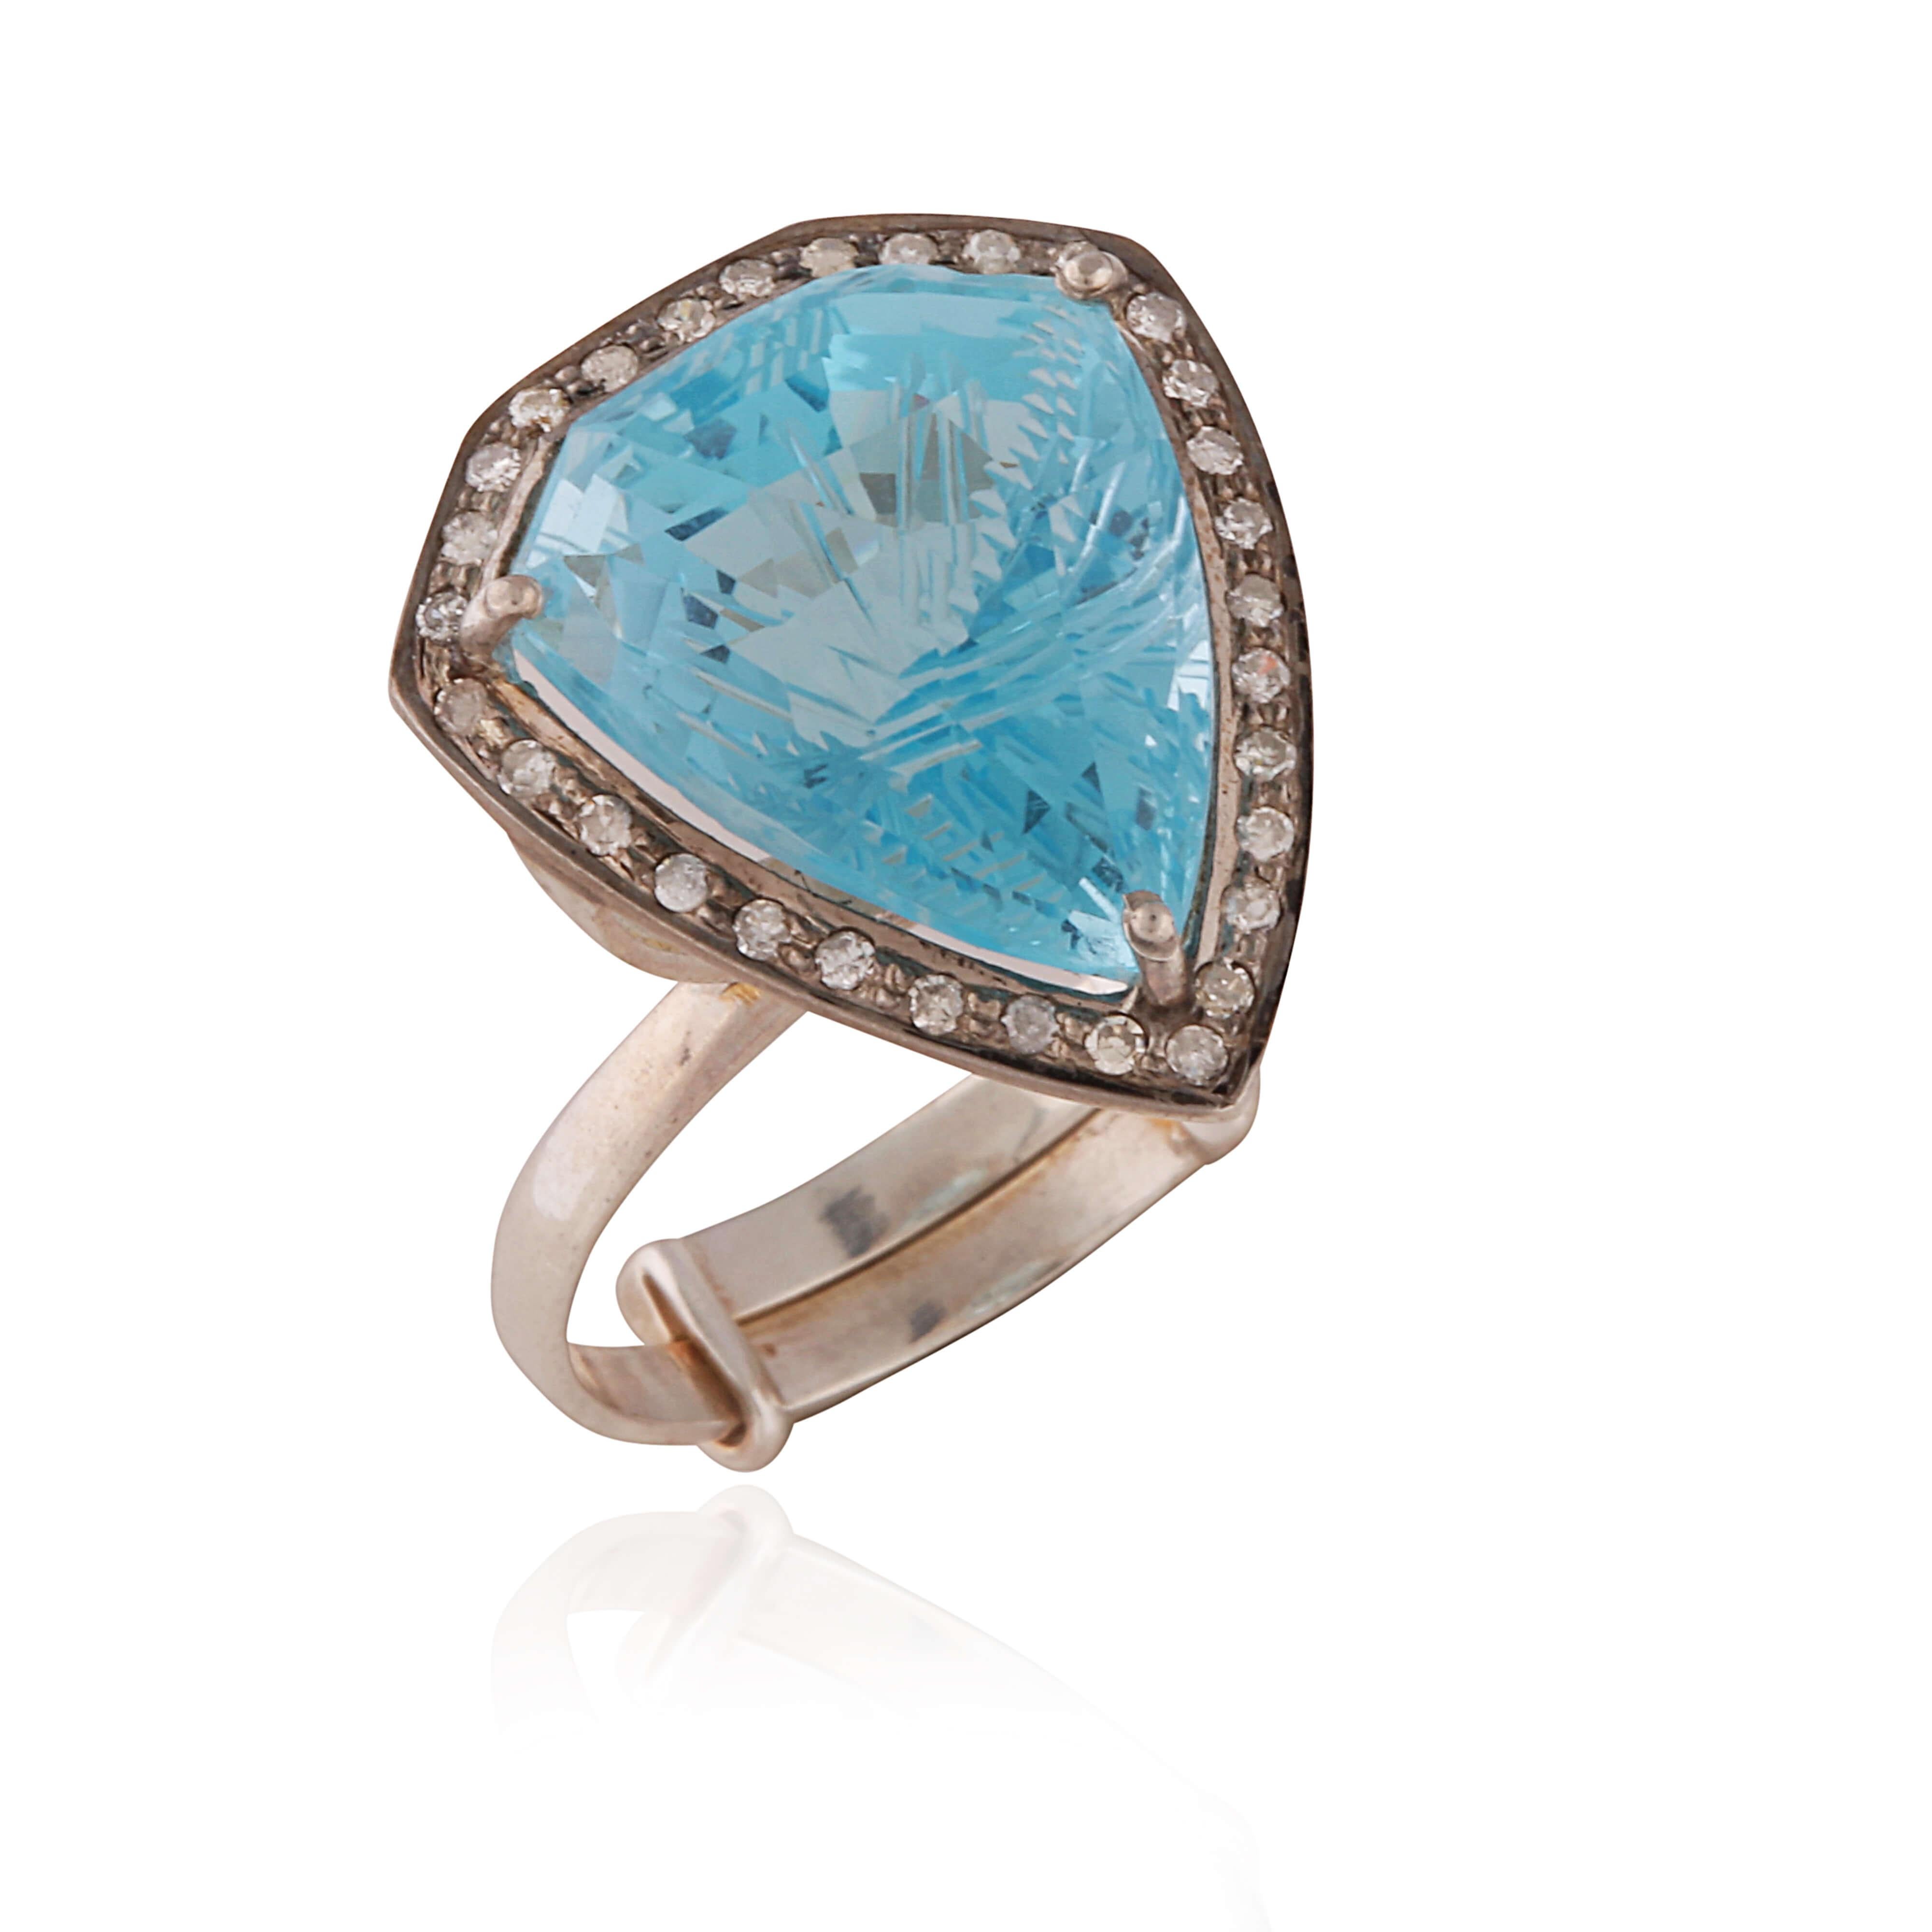 A really pretty ADJUSTABLE ring with a stunning carve Blue Topaz stone surrounded by a diamond border.

It is adjustable so can fit a range of finger sizes.

13.35 carat of carved blue topaz, 0.24 carat of diamonds.

Set on silver.

Comes with a